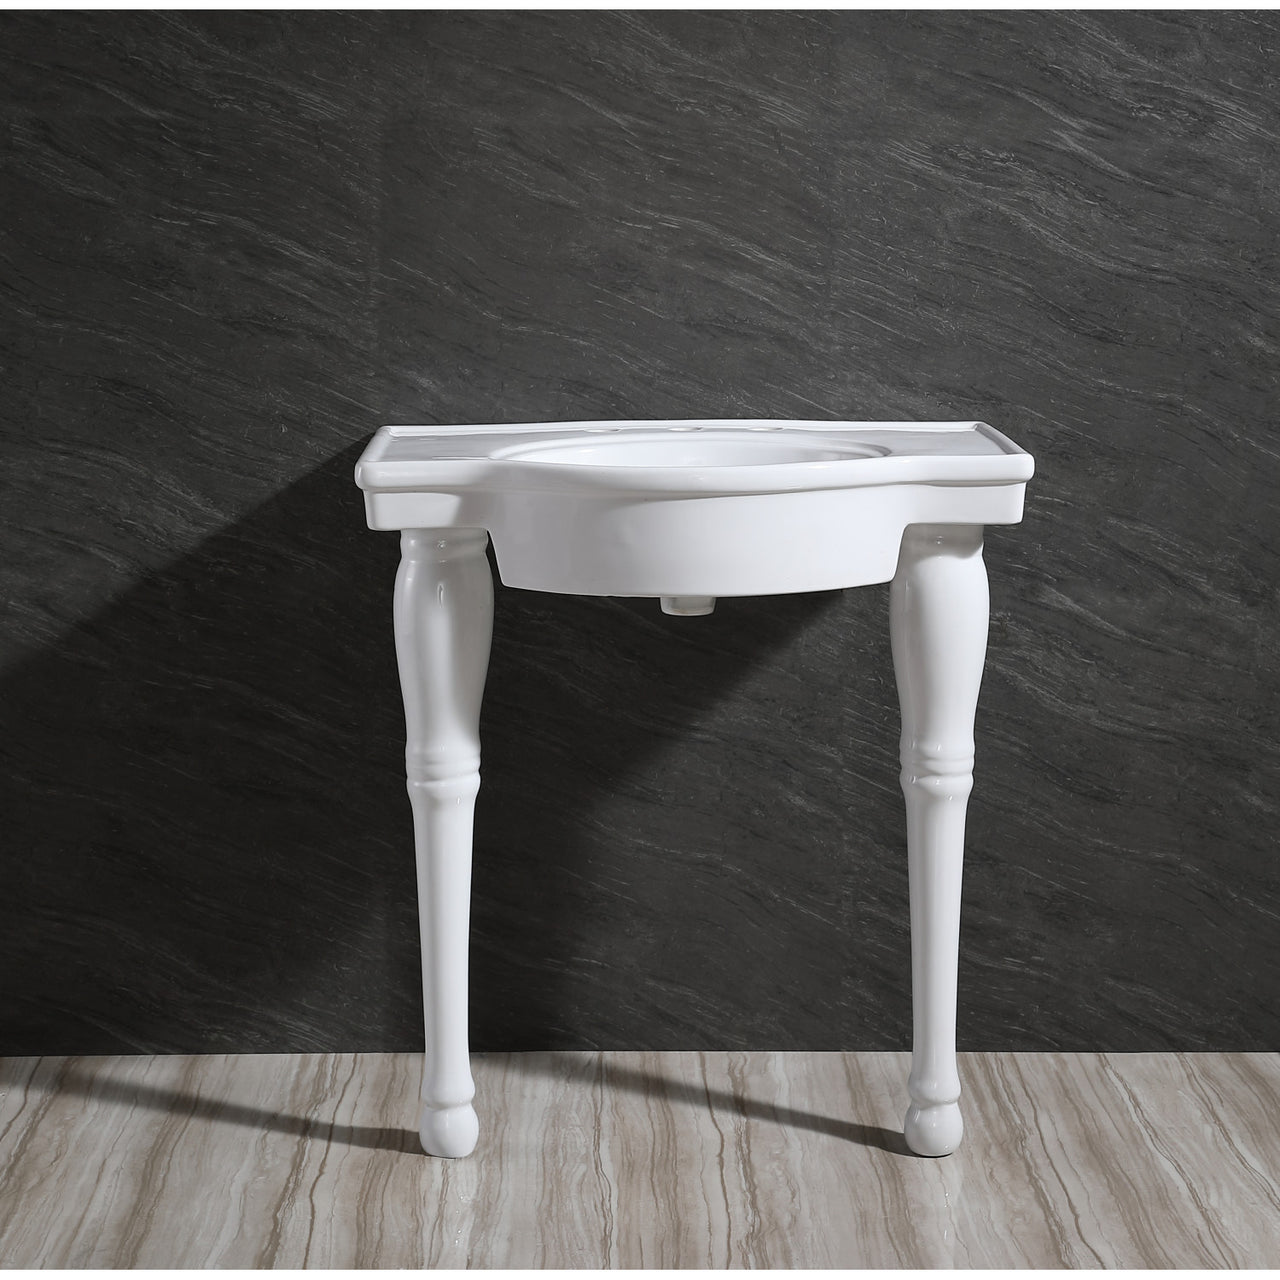 Kingston Brass Imperial Console Sink Legs - BNGBath